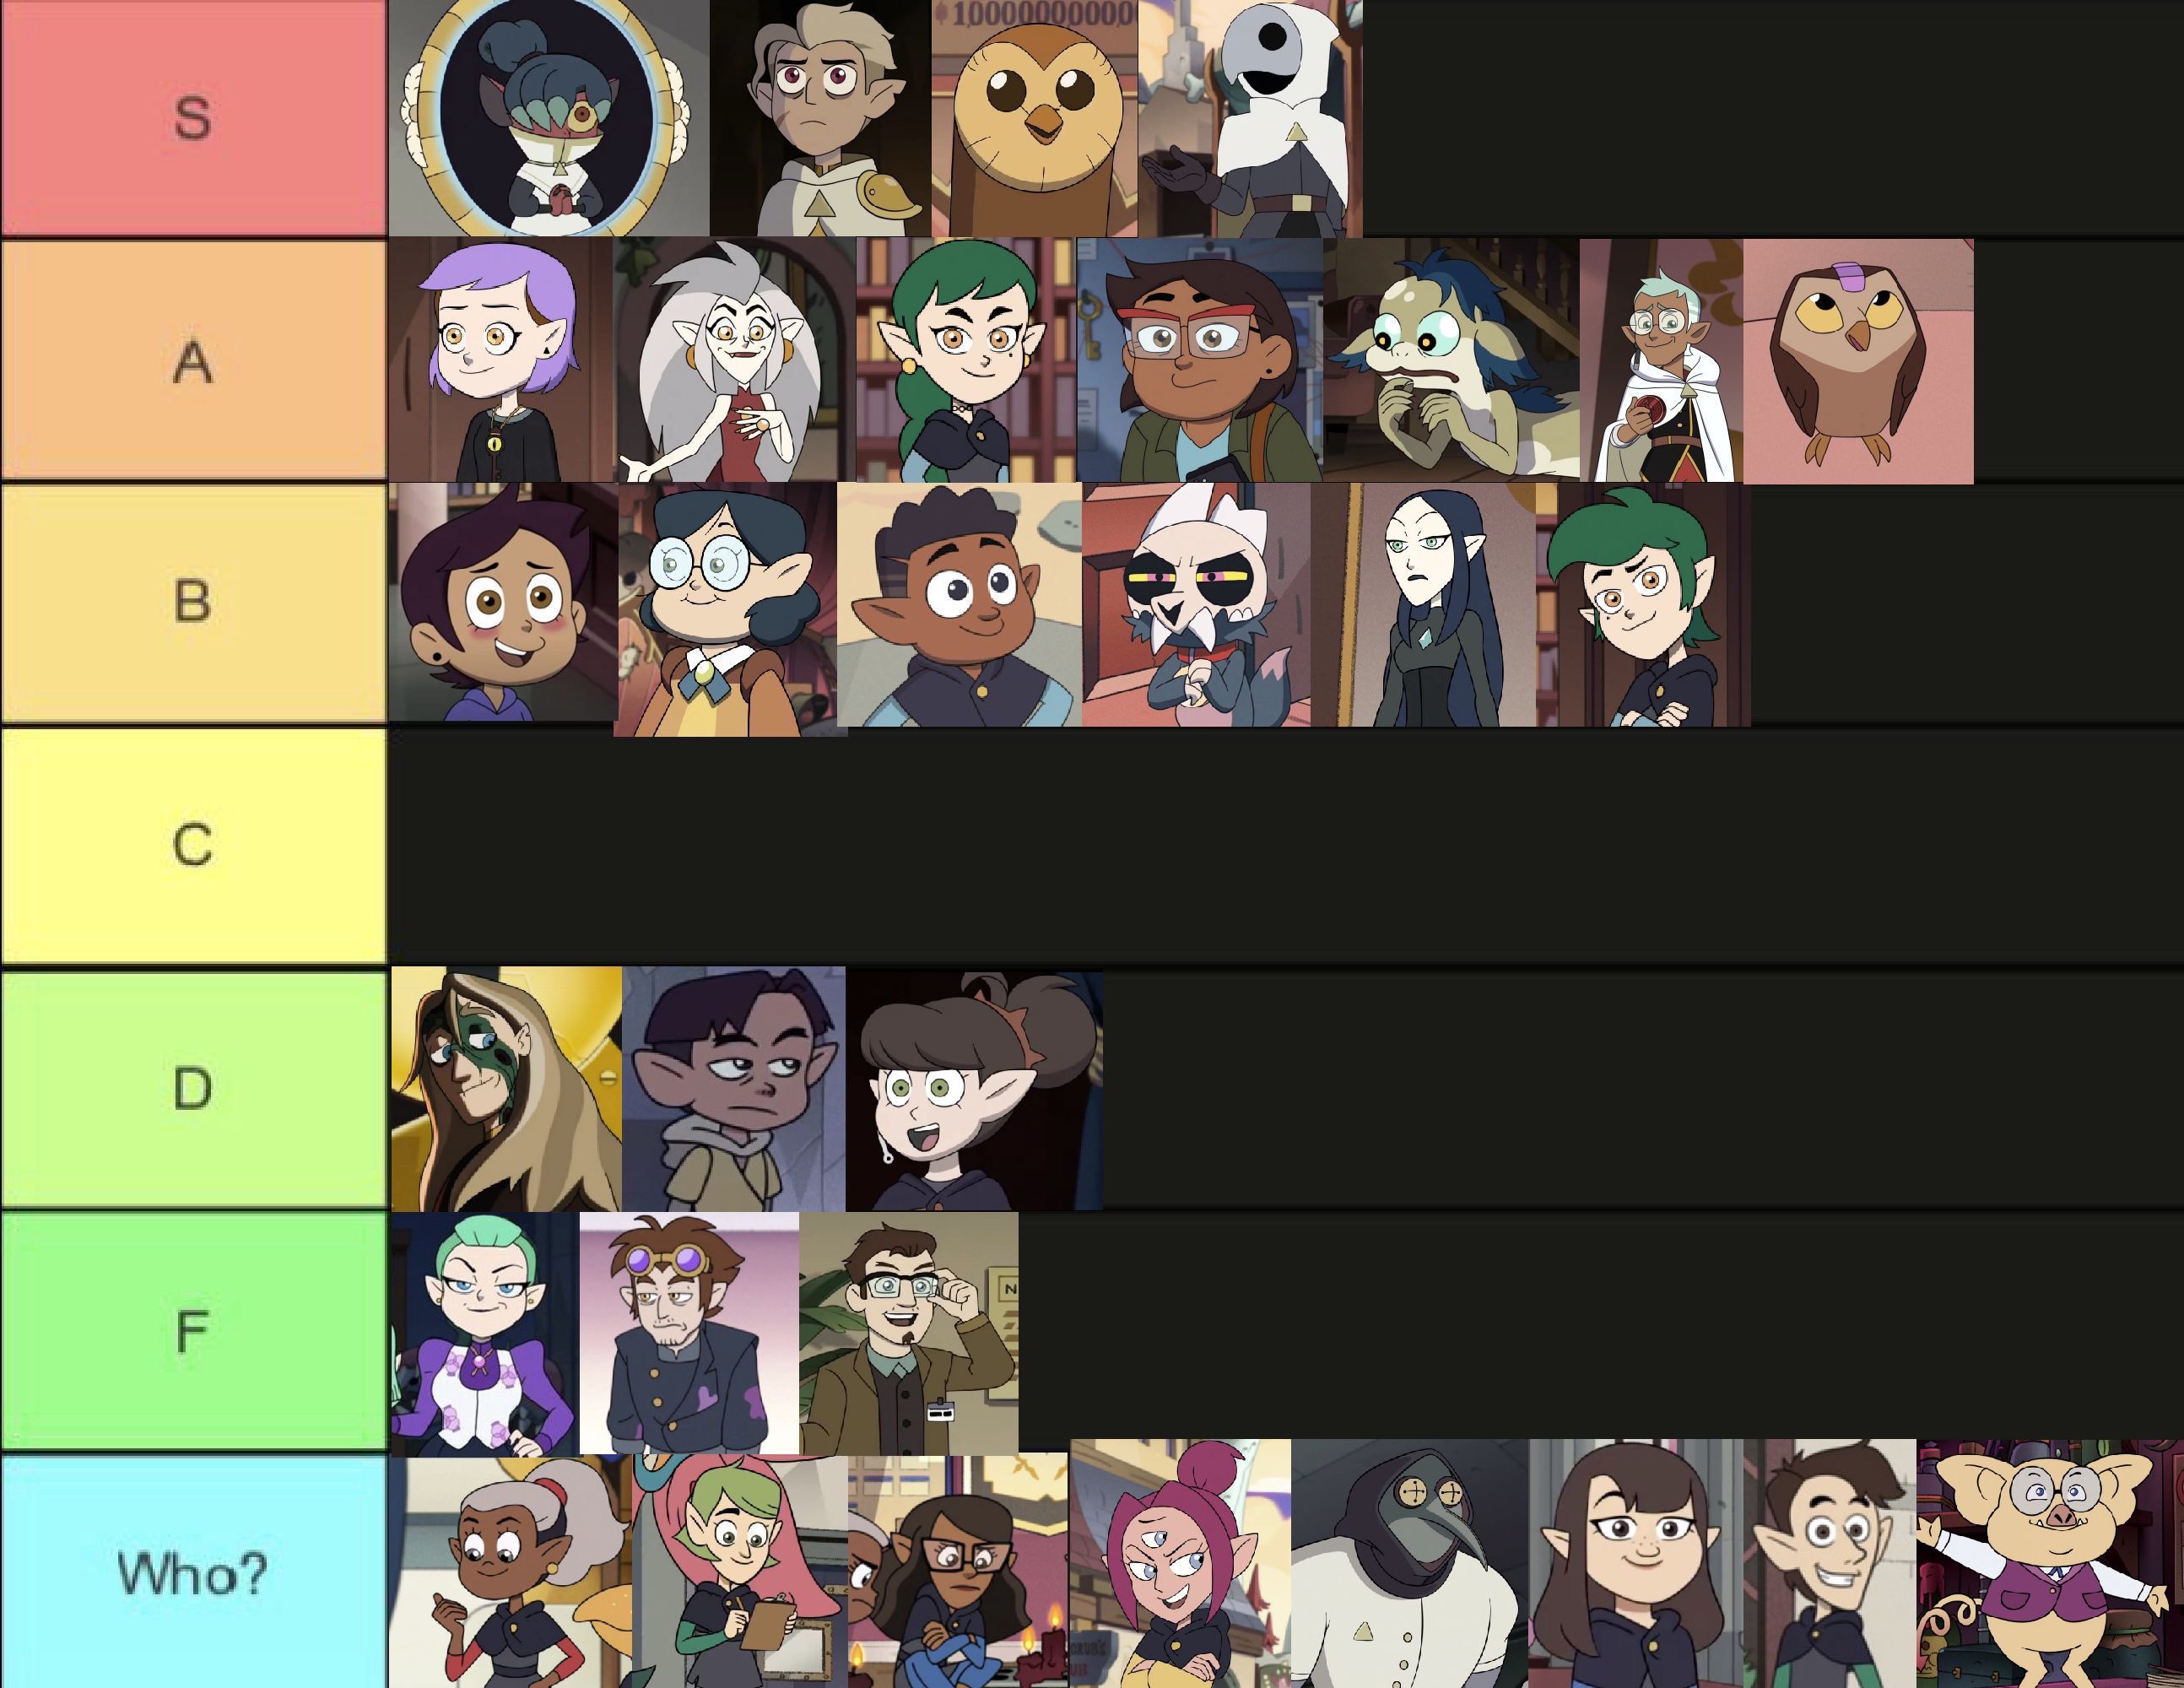 The Owl House Character Tier List 